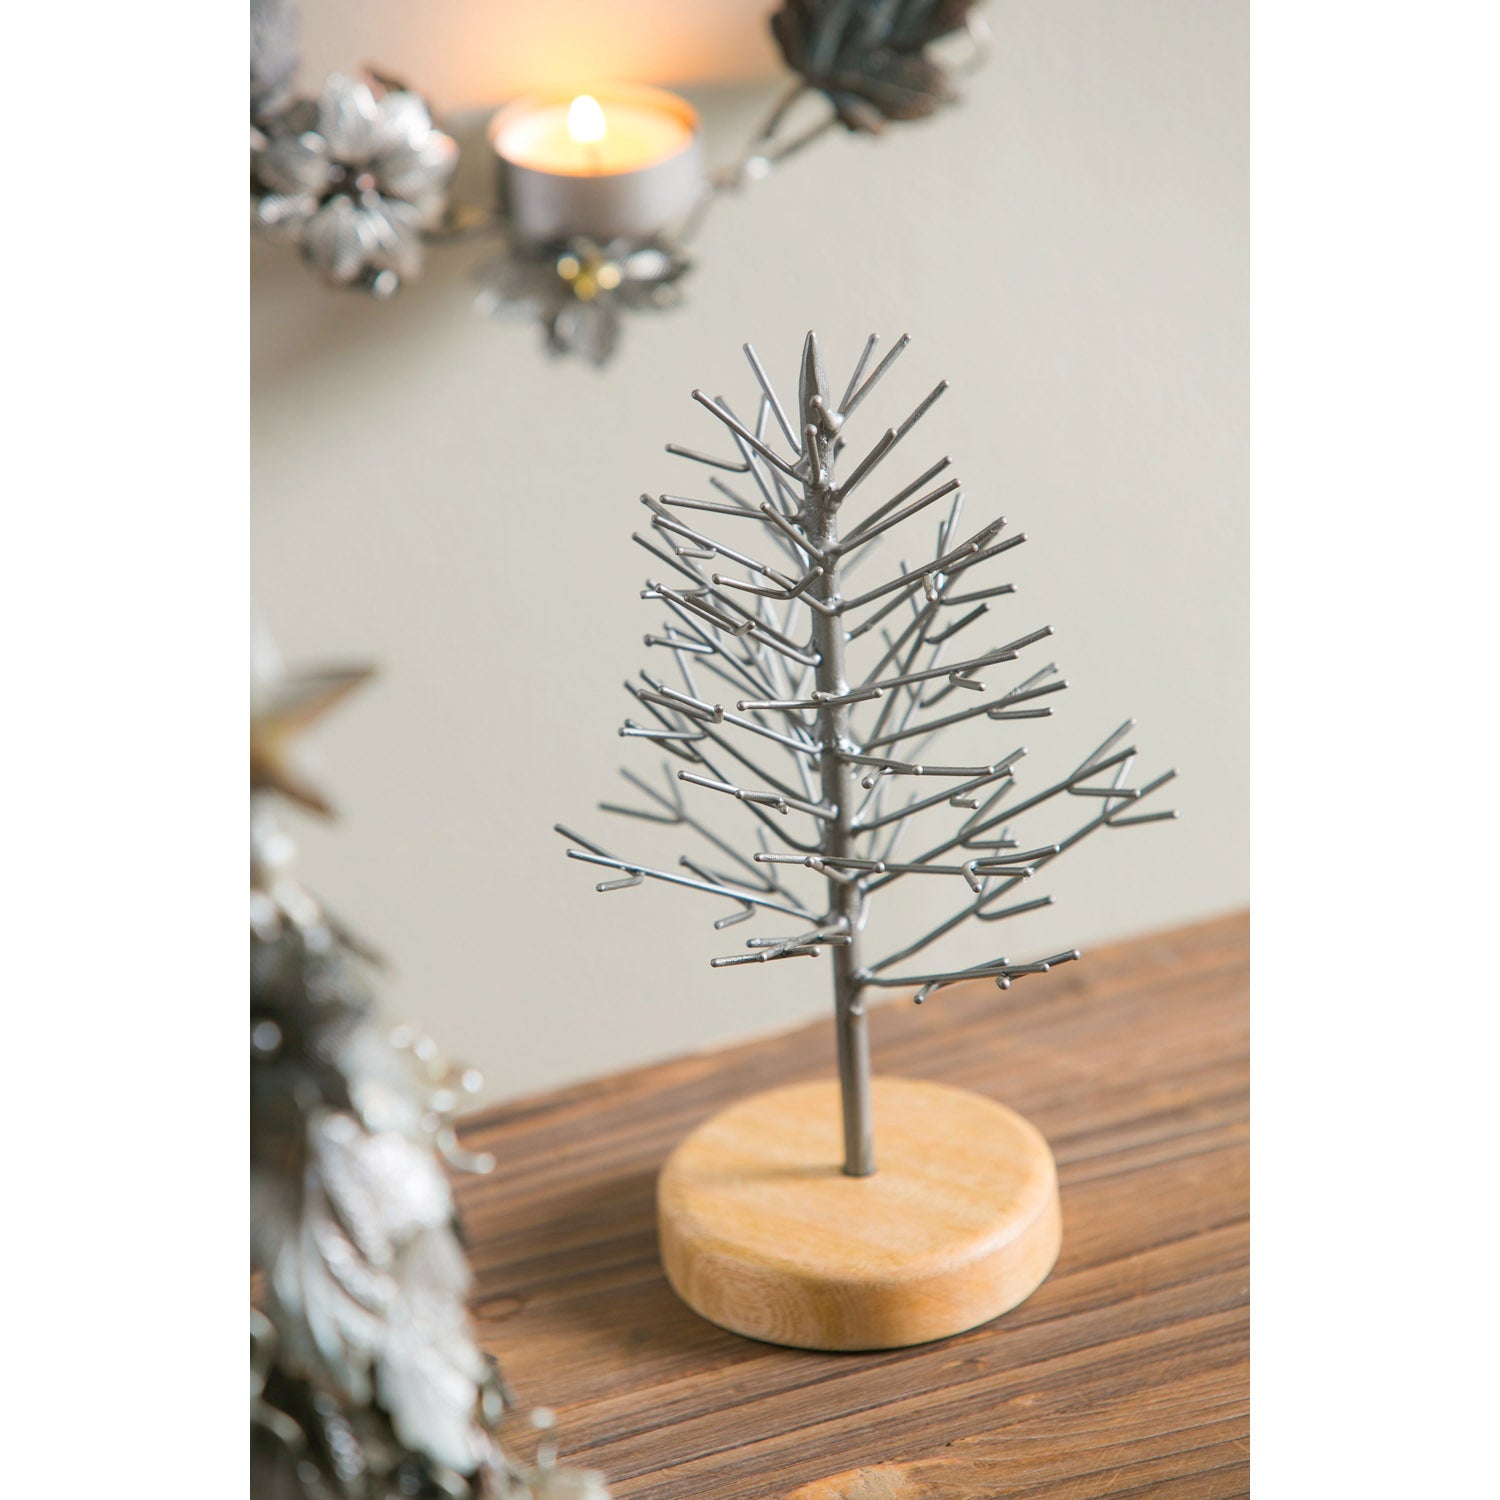 8'' Metal Tree with Wooden Base Table Décor